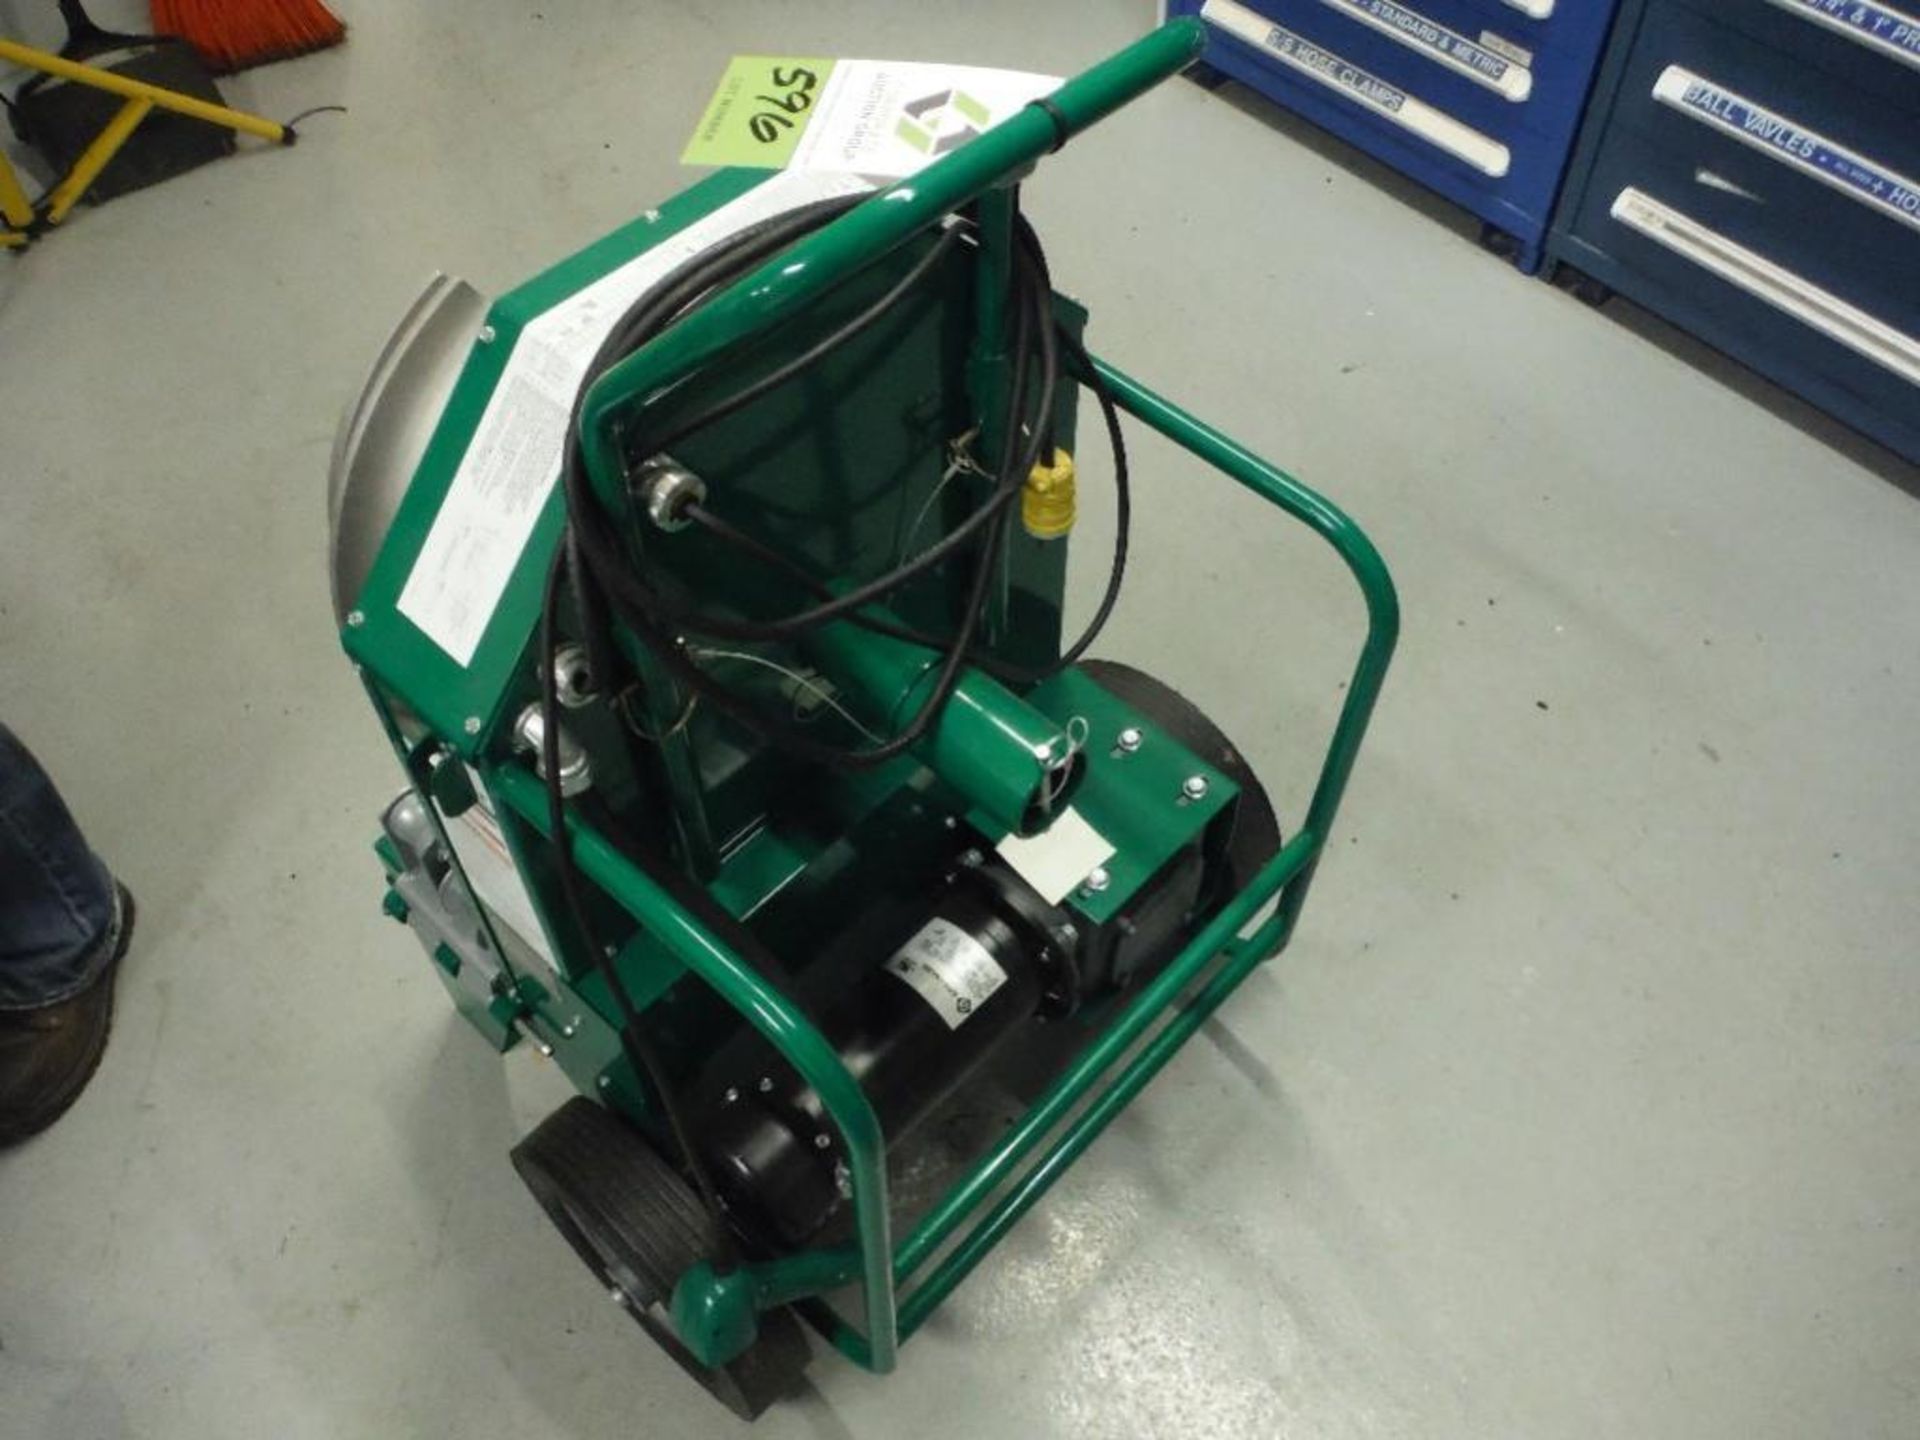 Greenlee 555C electric pipe bender for 1/2 in. to 2 in. conduit, SN AFB5513GQ with 1/2 to 2 in. rigi - Image 3 of 11